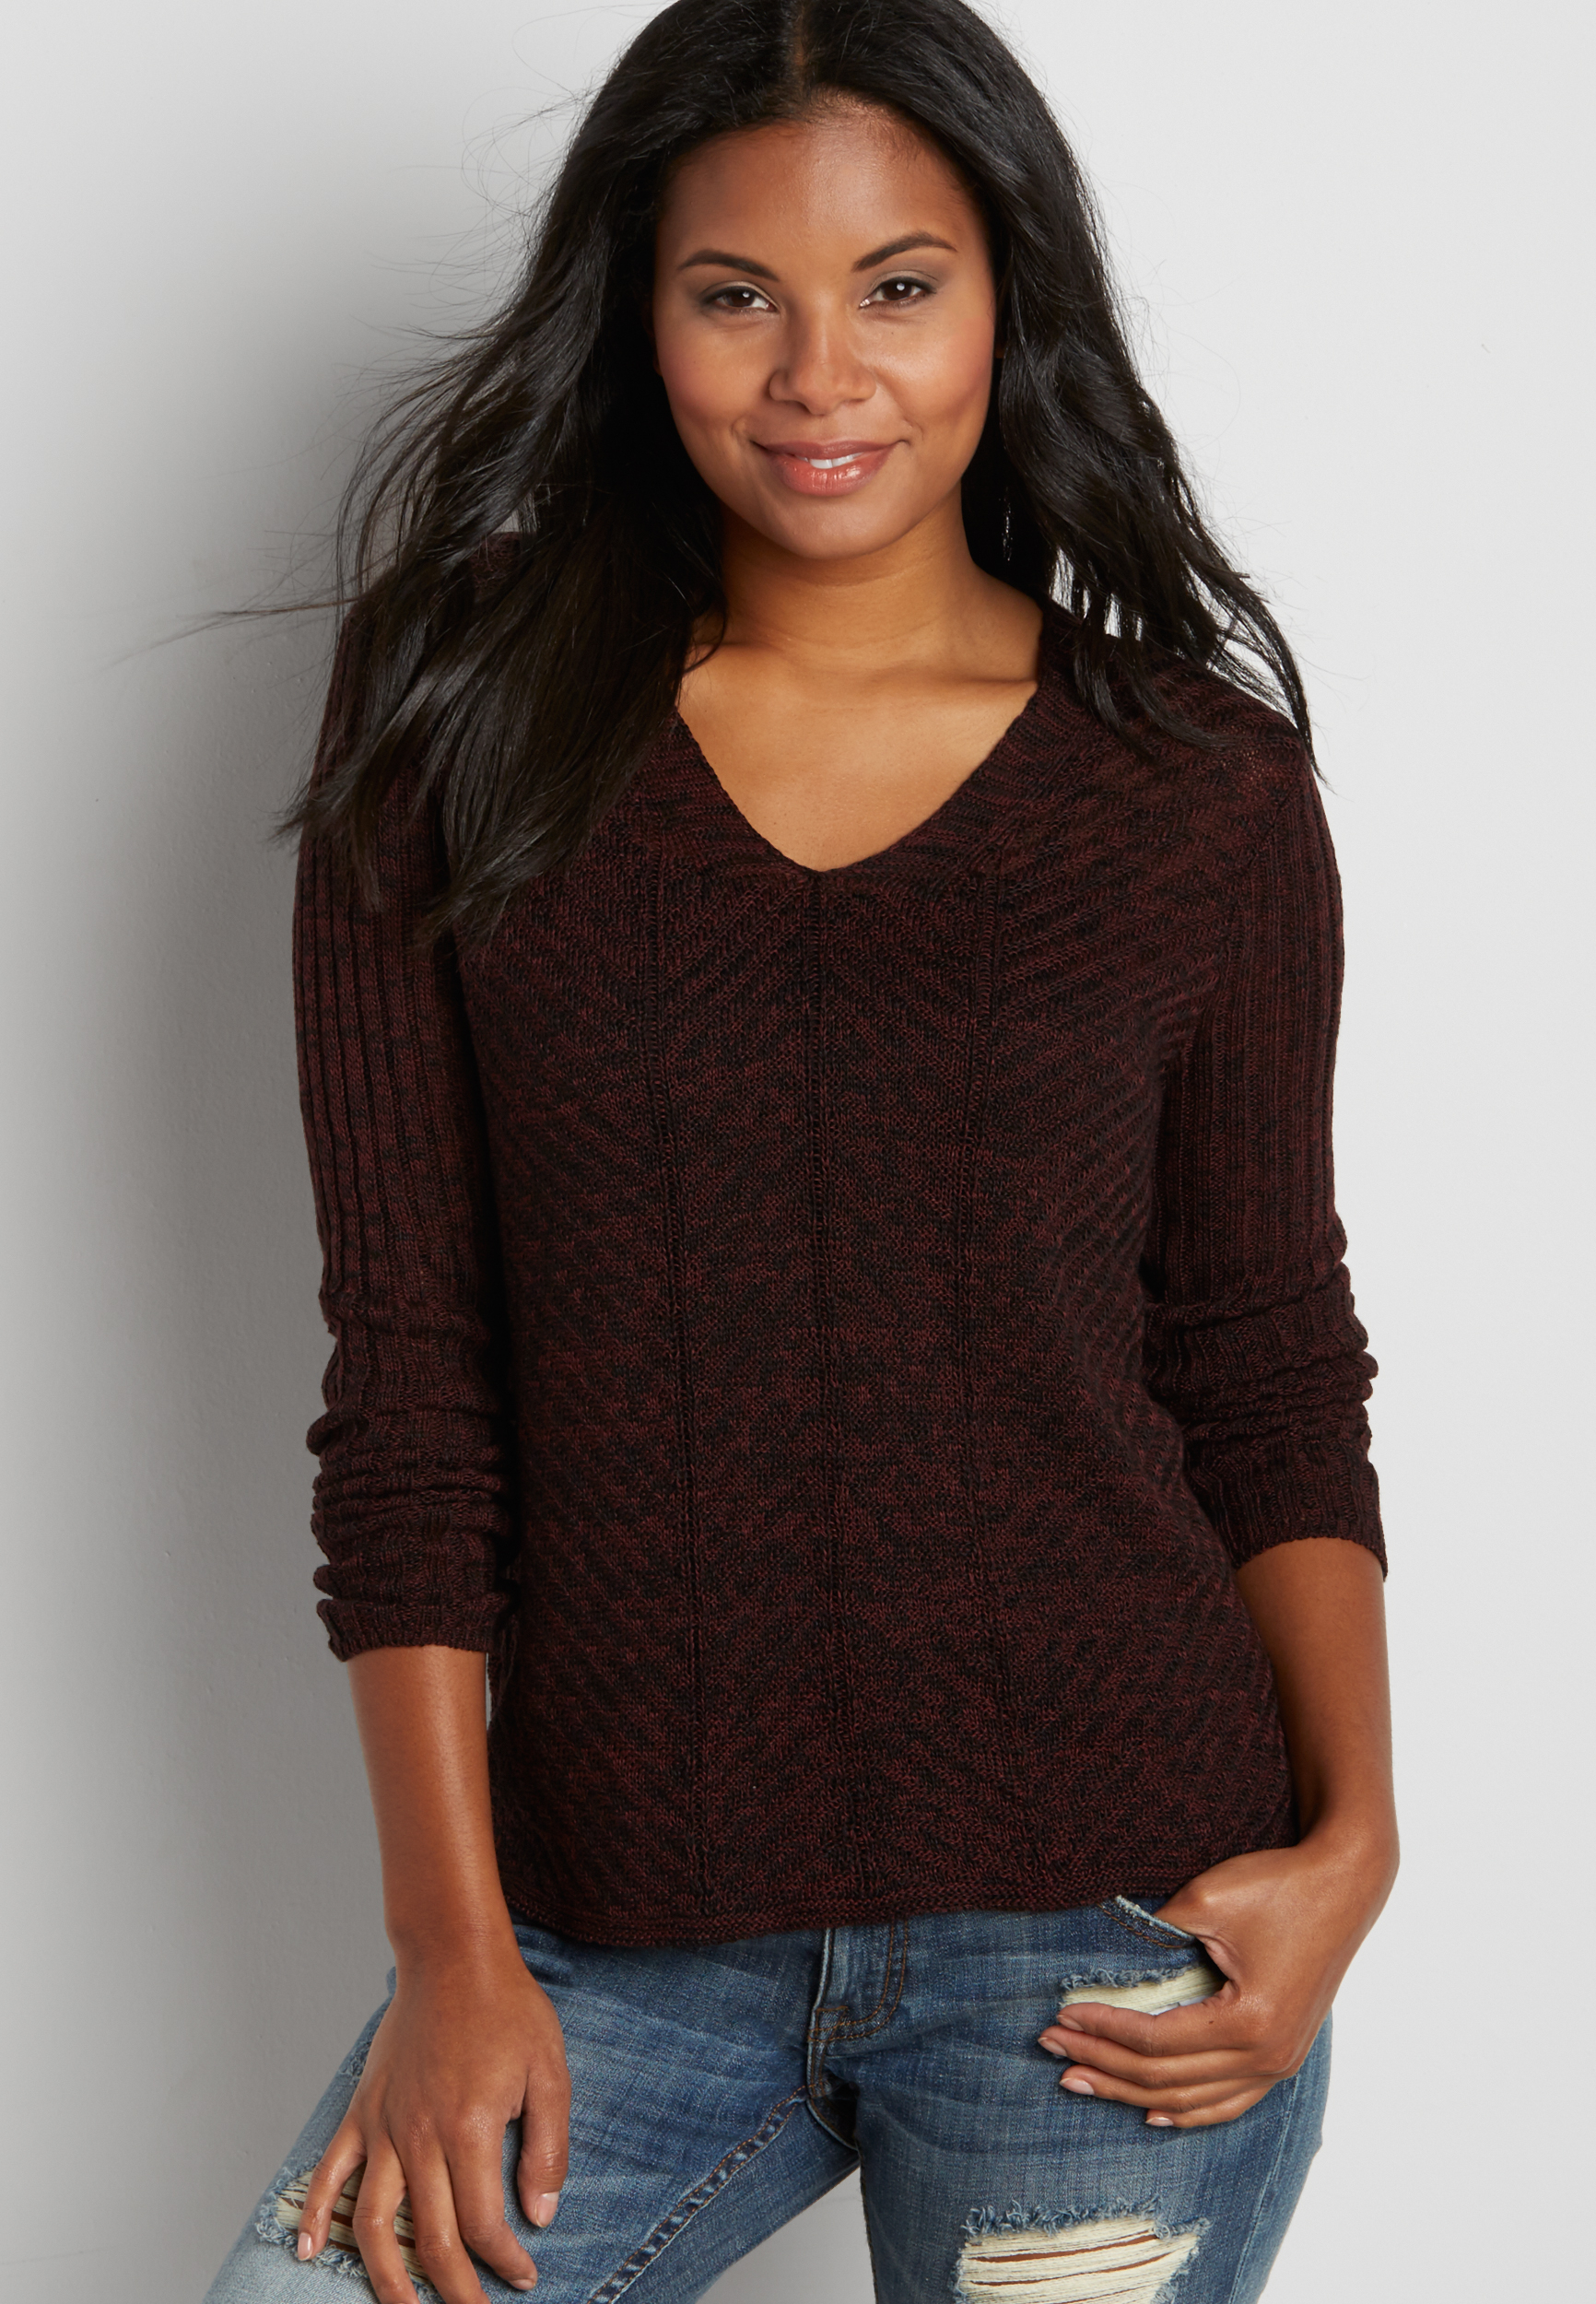 pullover sweater with herringbone stitching | maurices